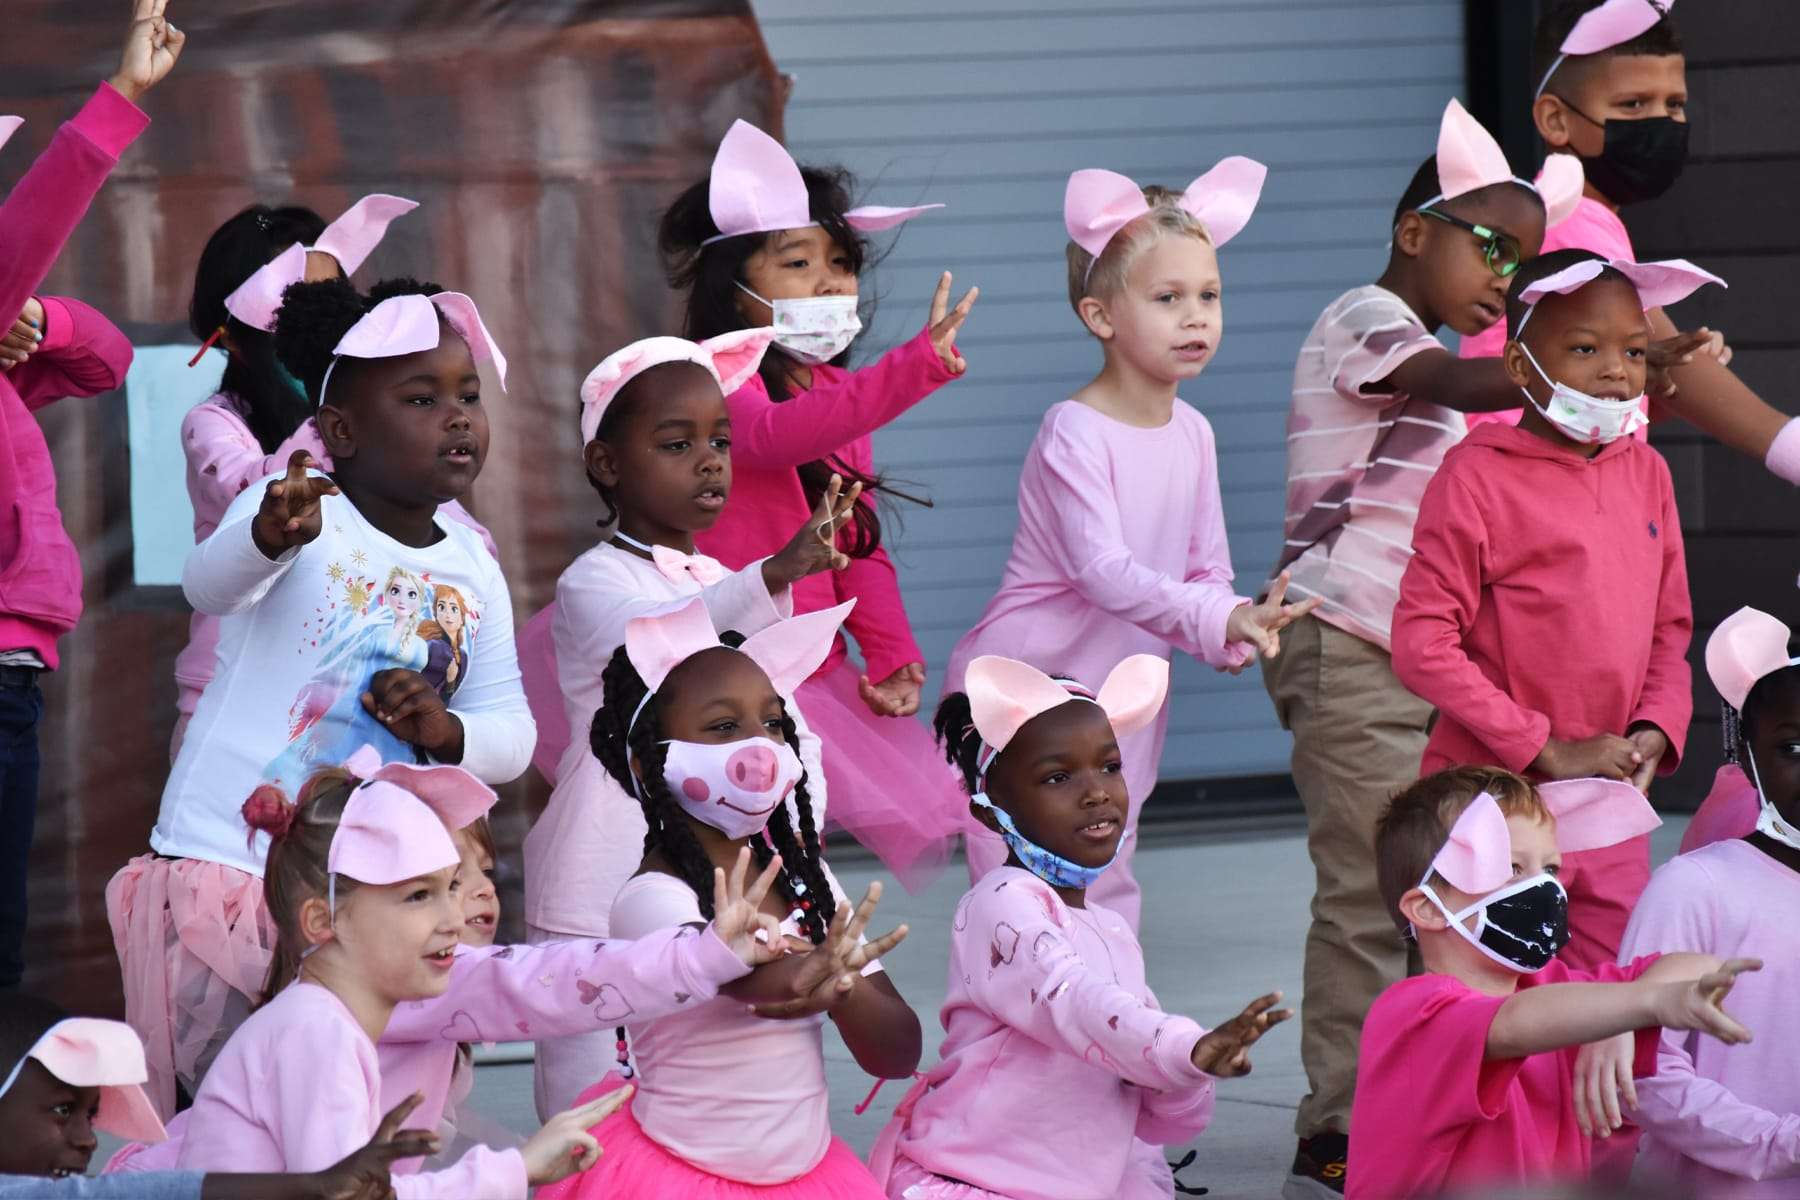 students dresses as pigs